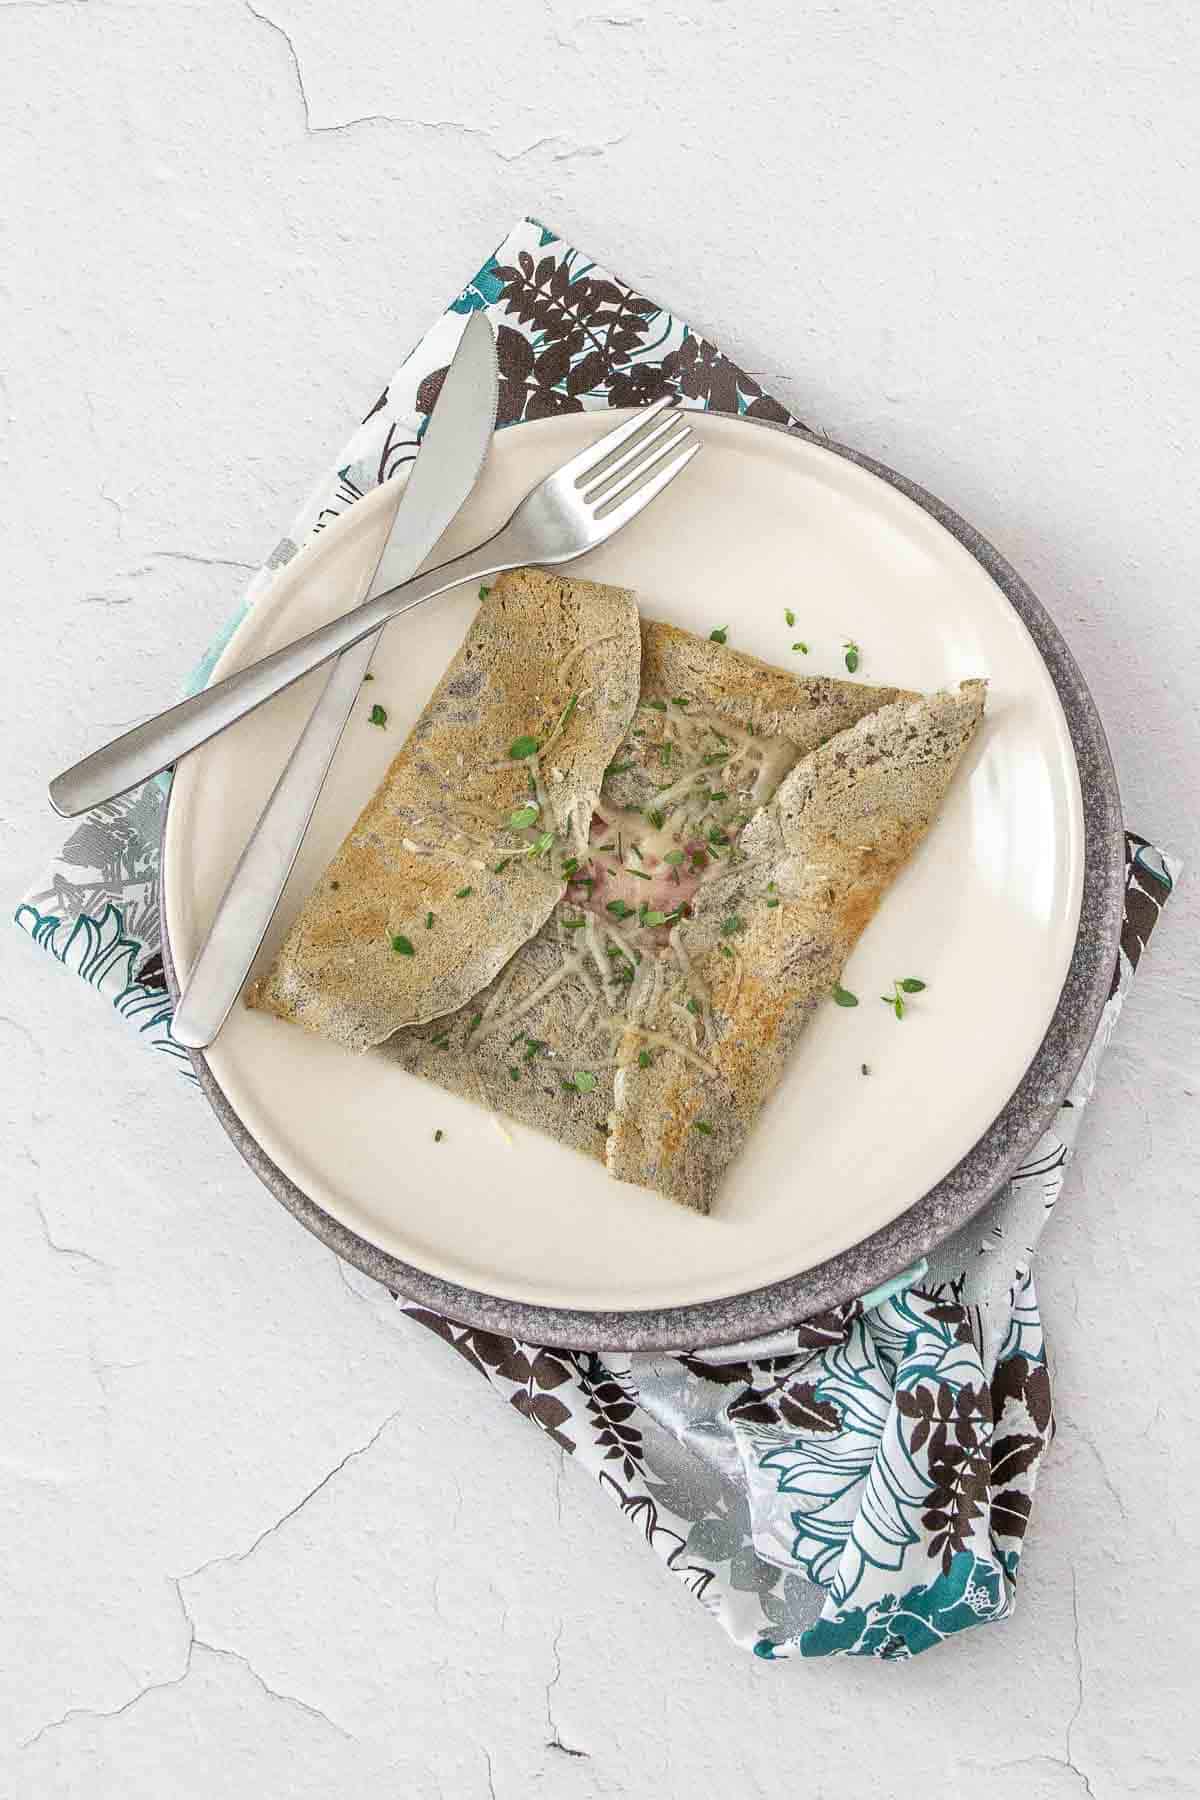 Plate with gluten free crepe on top, filled with ham and cheese.